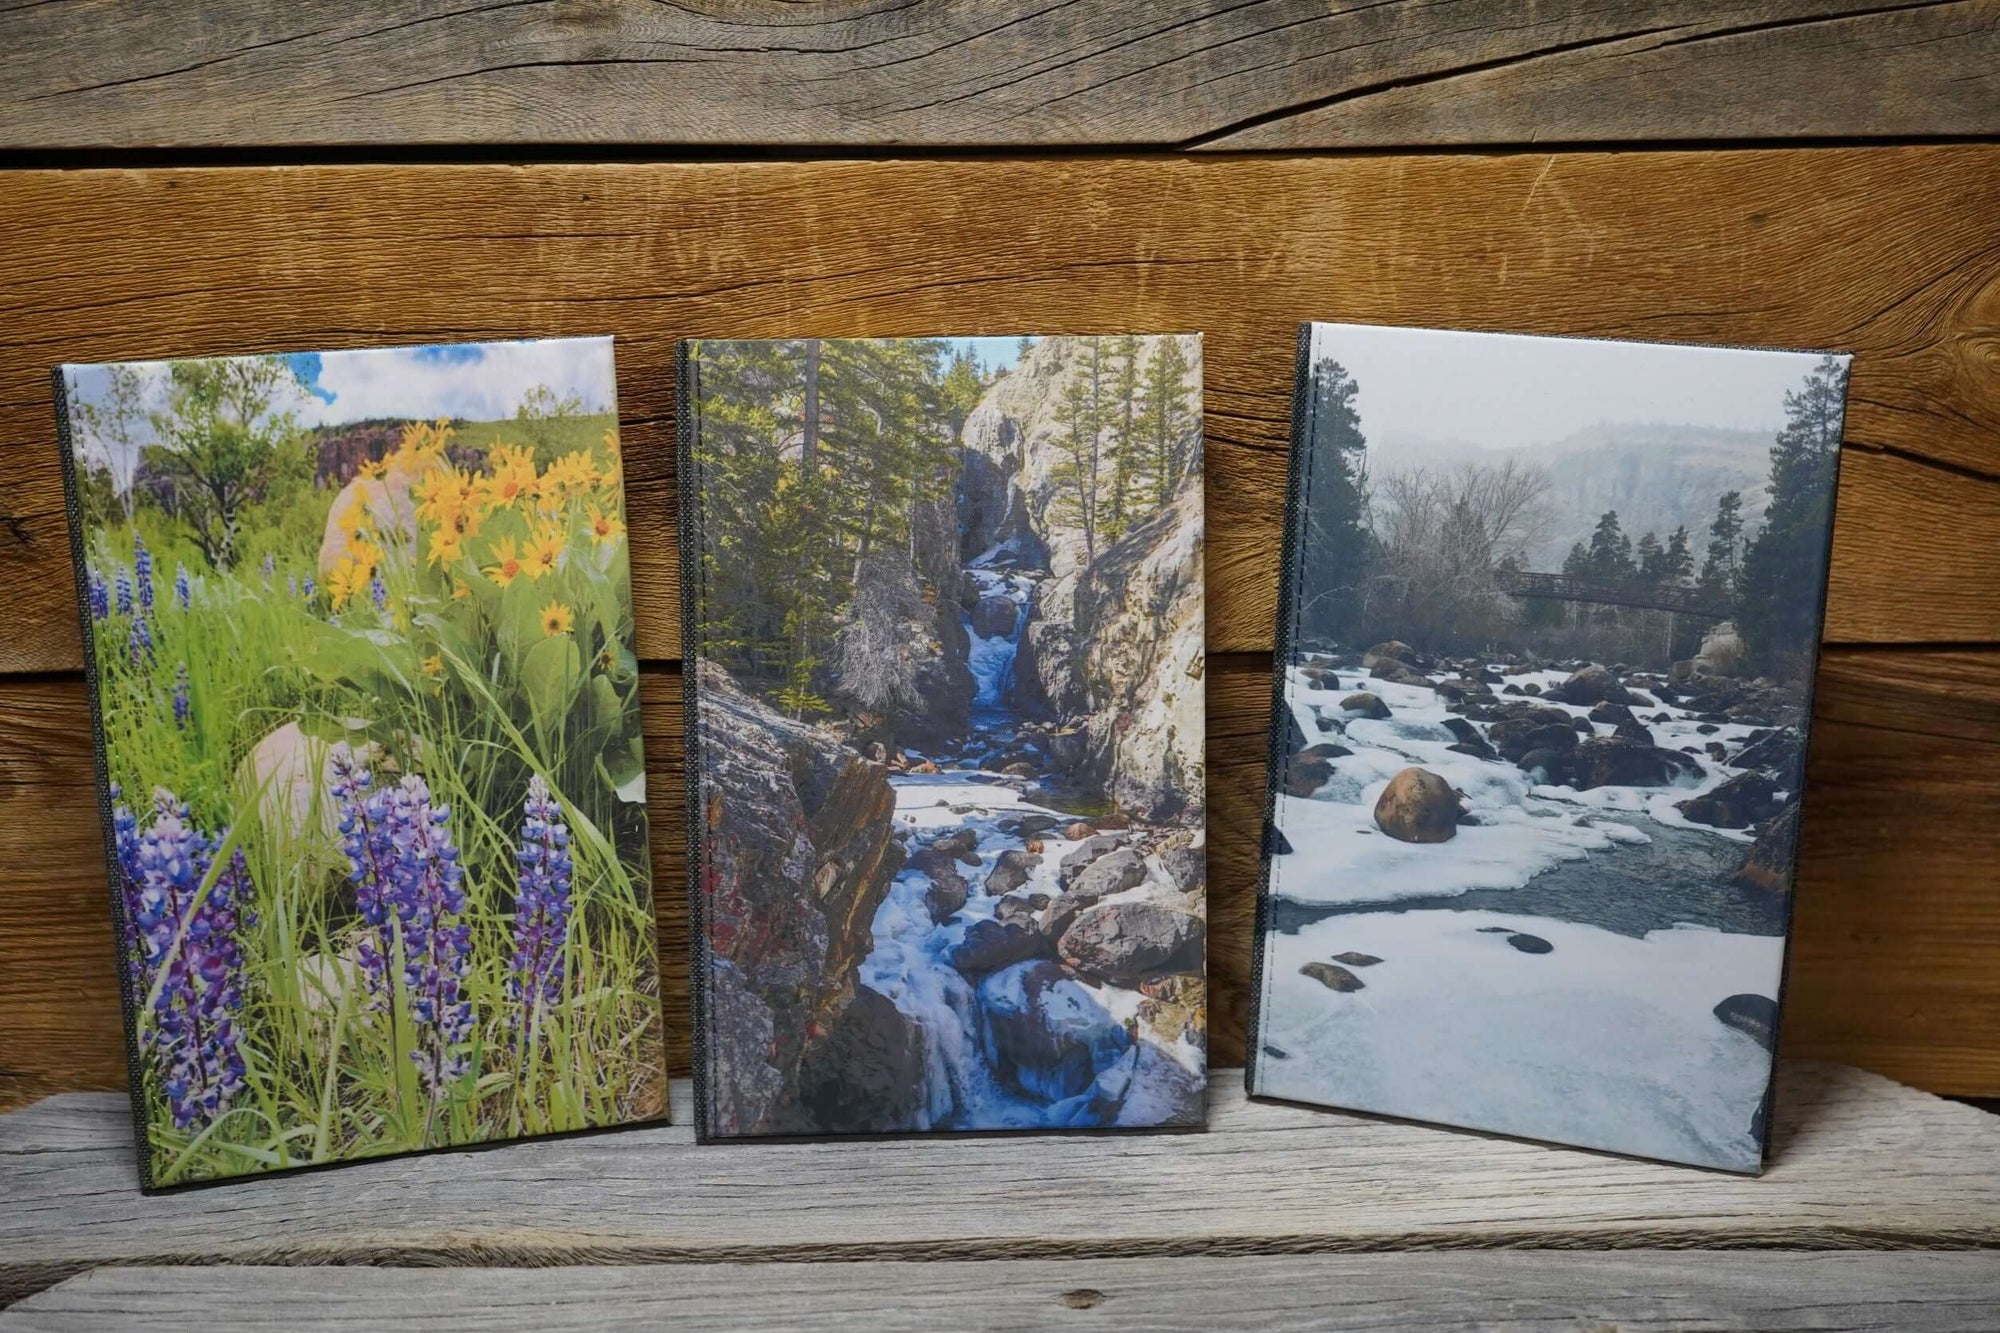 7x9" hardcover journals with Wyoming photos sublimated on cover. Wildflower, Waterfall, or Winter scenes. Photography by Libby Littler.